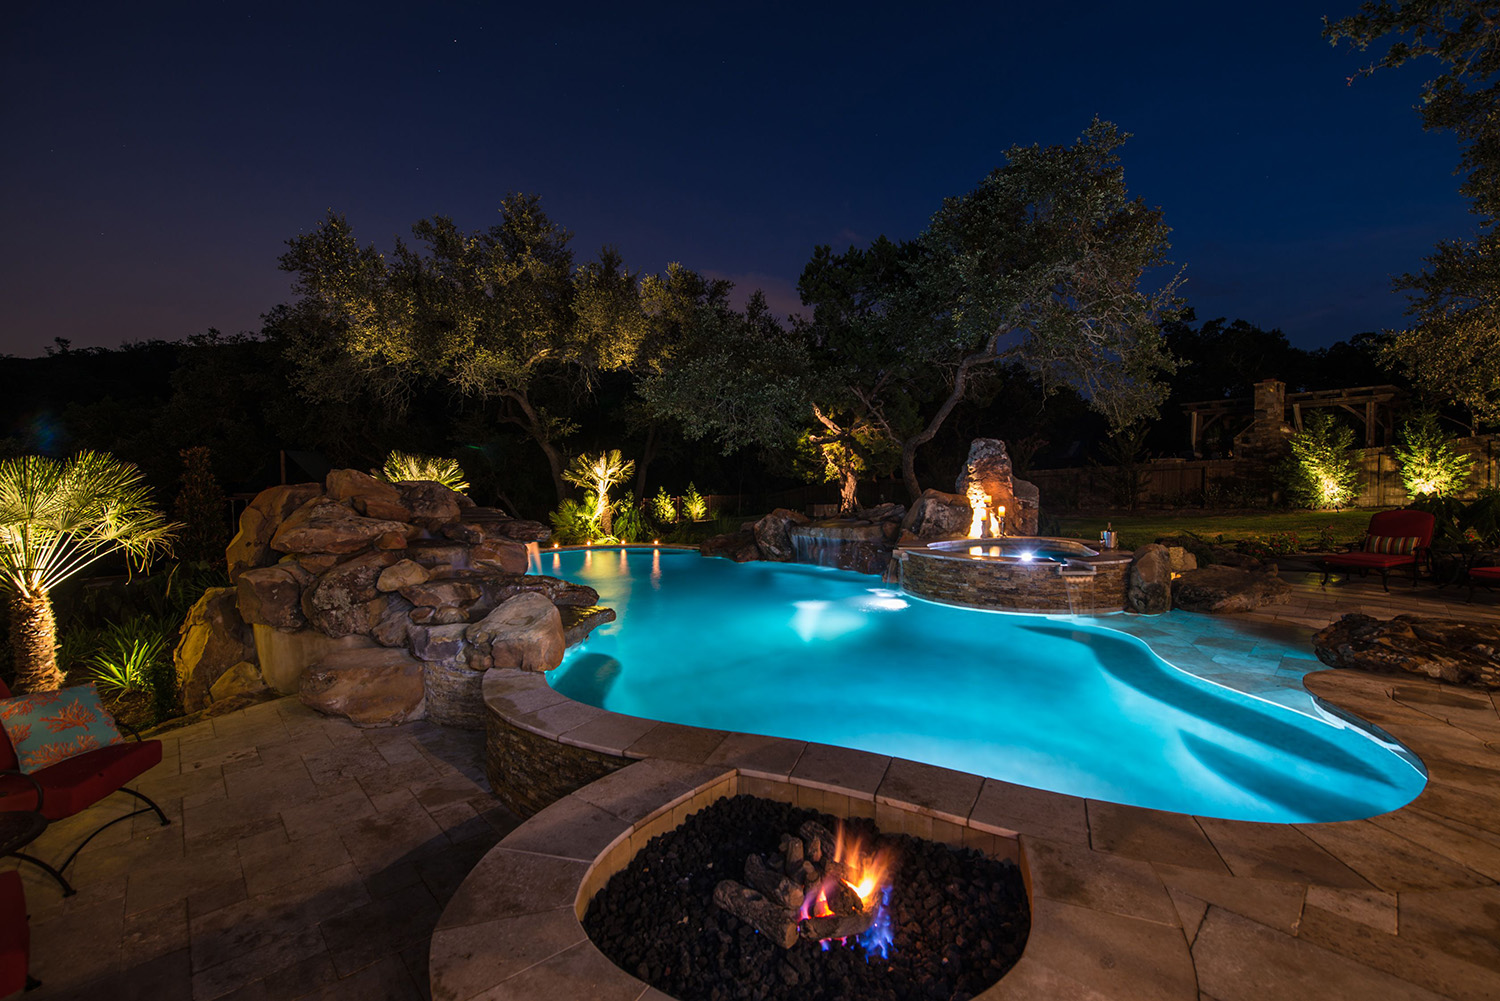 Pool and Spa Construction services with Infinity Pools of Texas.